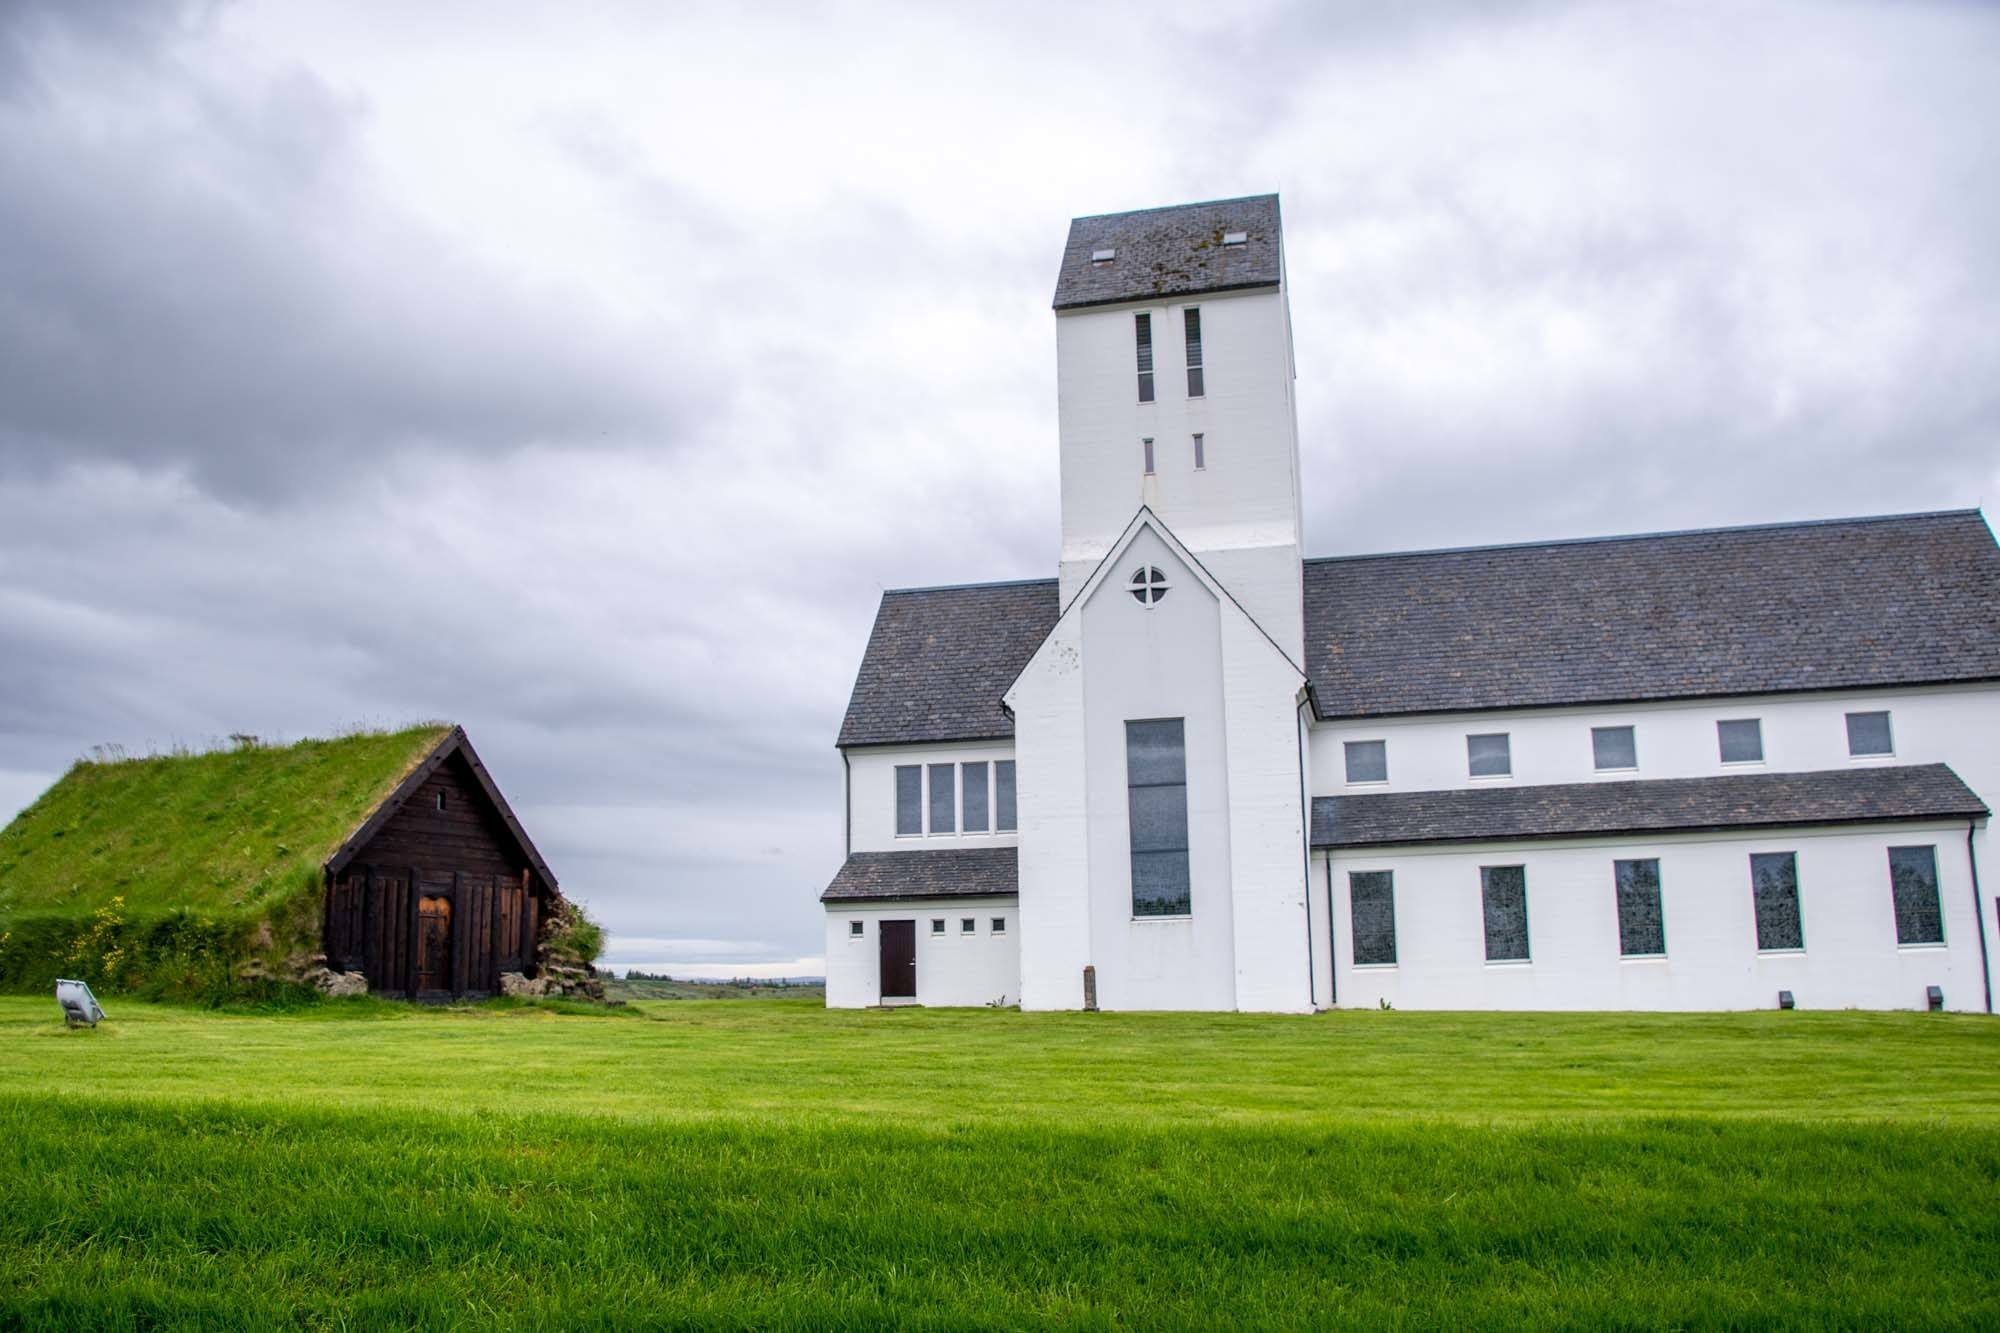 Old turf church next to modern white cathedral